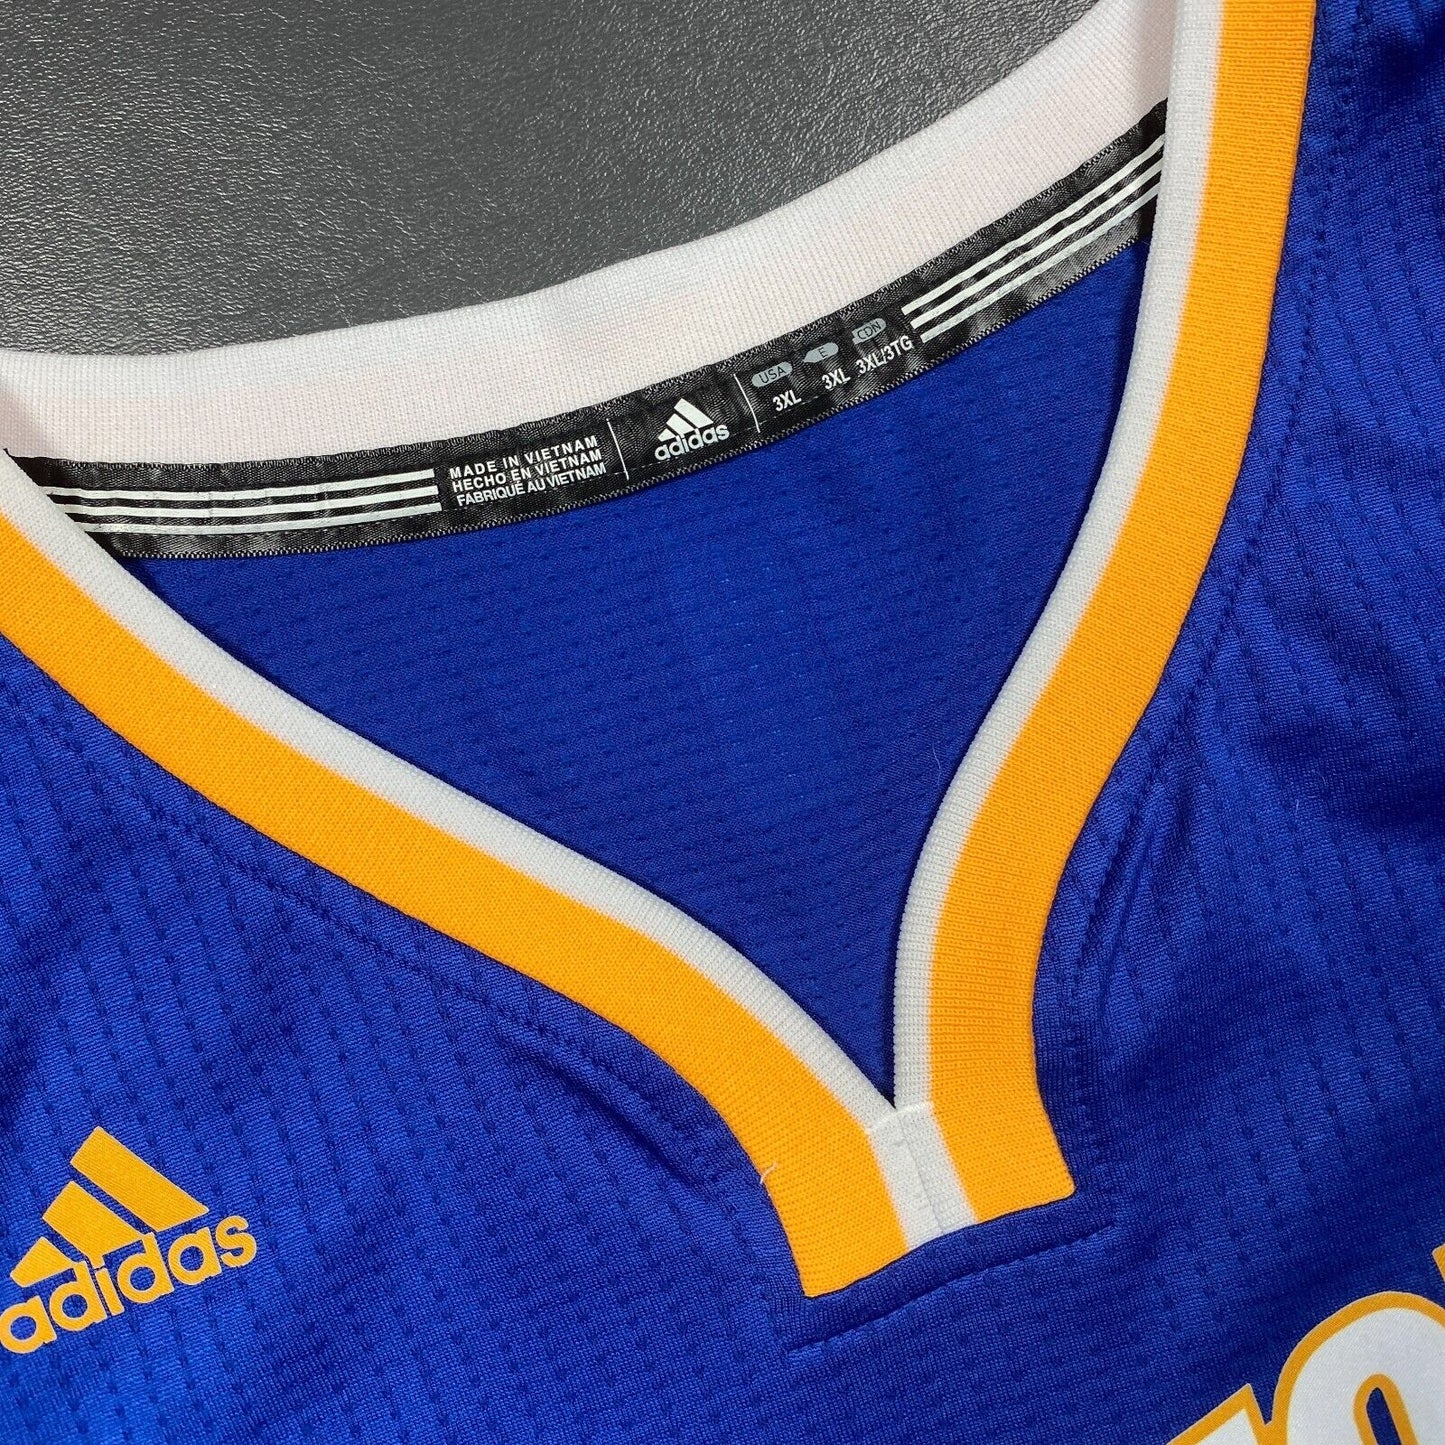 100% Authentic Kevin Durant Adidas Golden State Warriors Jersey Size 3XL Mens